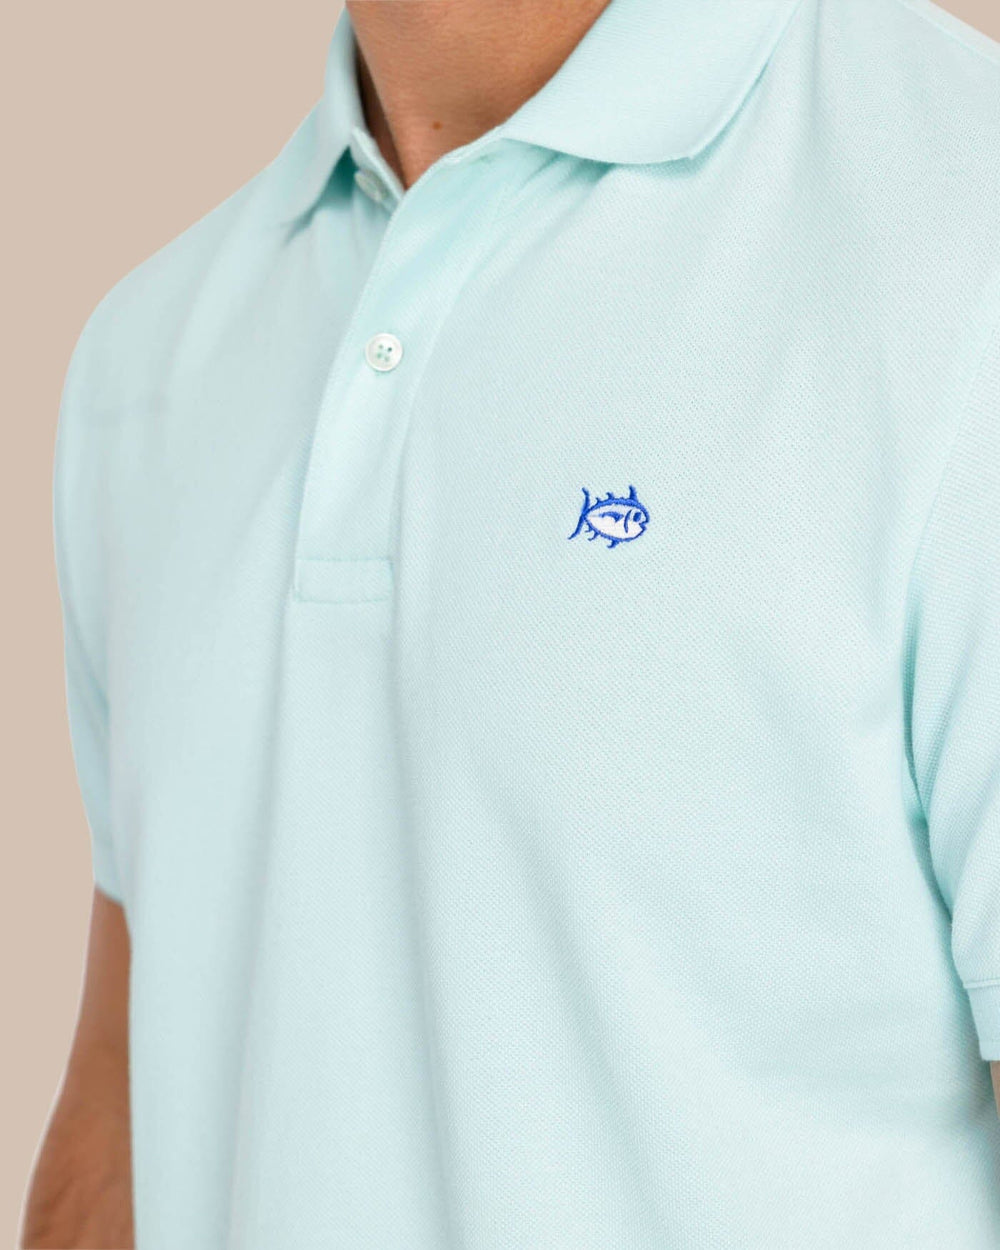 The model detail view of the Men's New Skipjack Polo Shirt by Southern Tide - Baltic Teal